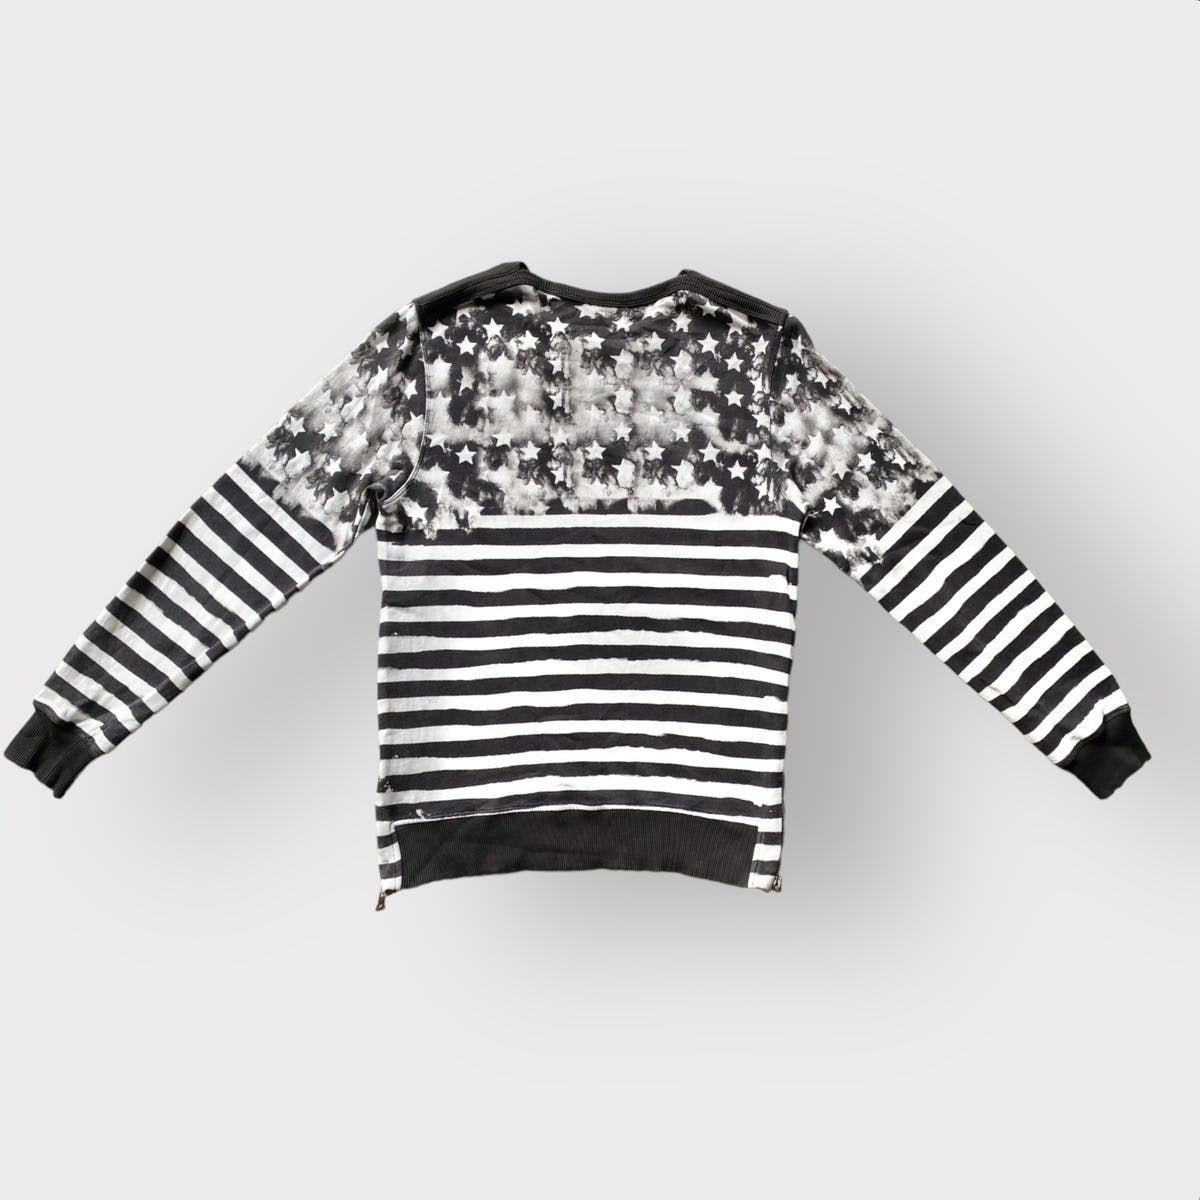 SS18 Flag Sweater - 5